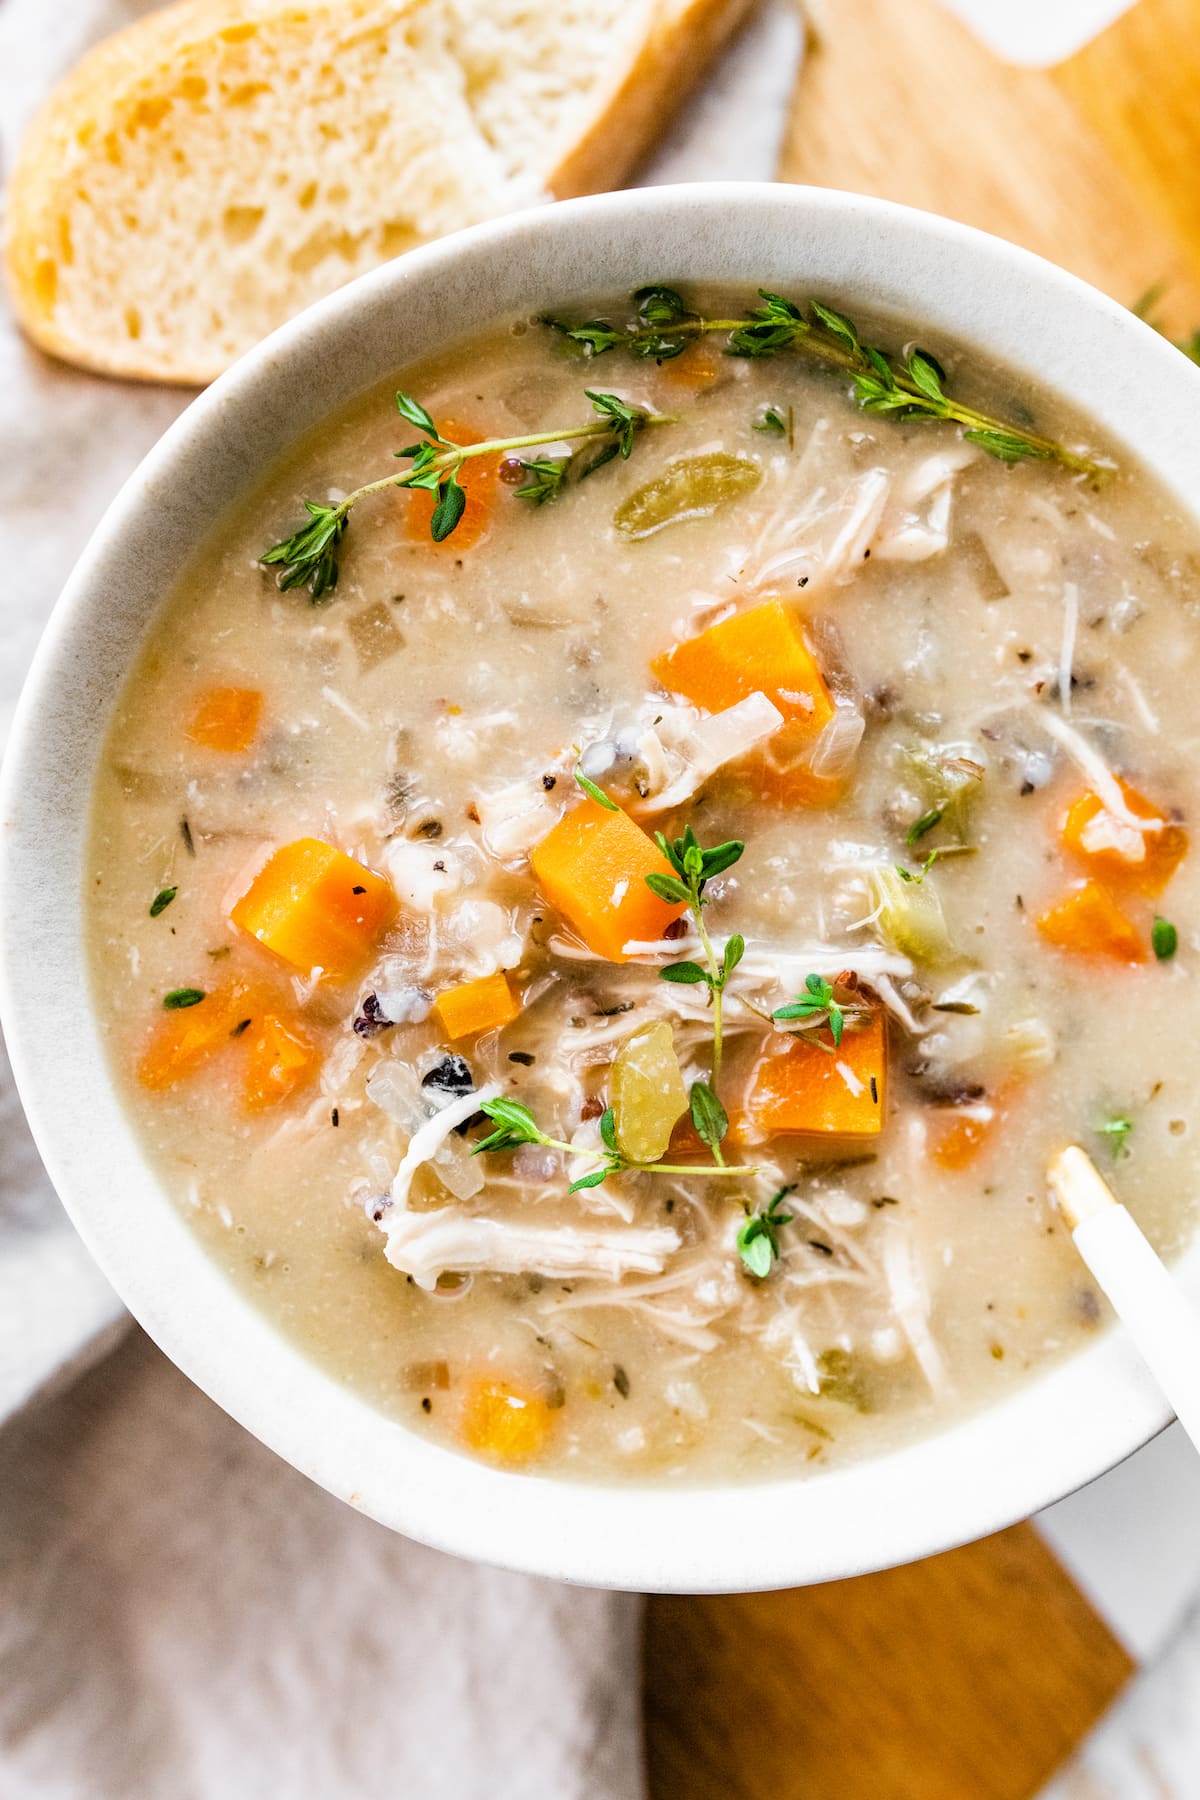 https://www.eatingbirdfood.com/wp-content/uploads/2022/10/chicken-and-wild-rice-soup-hero.jpg